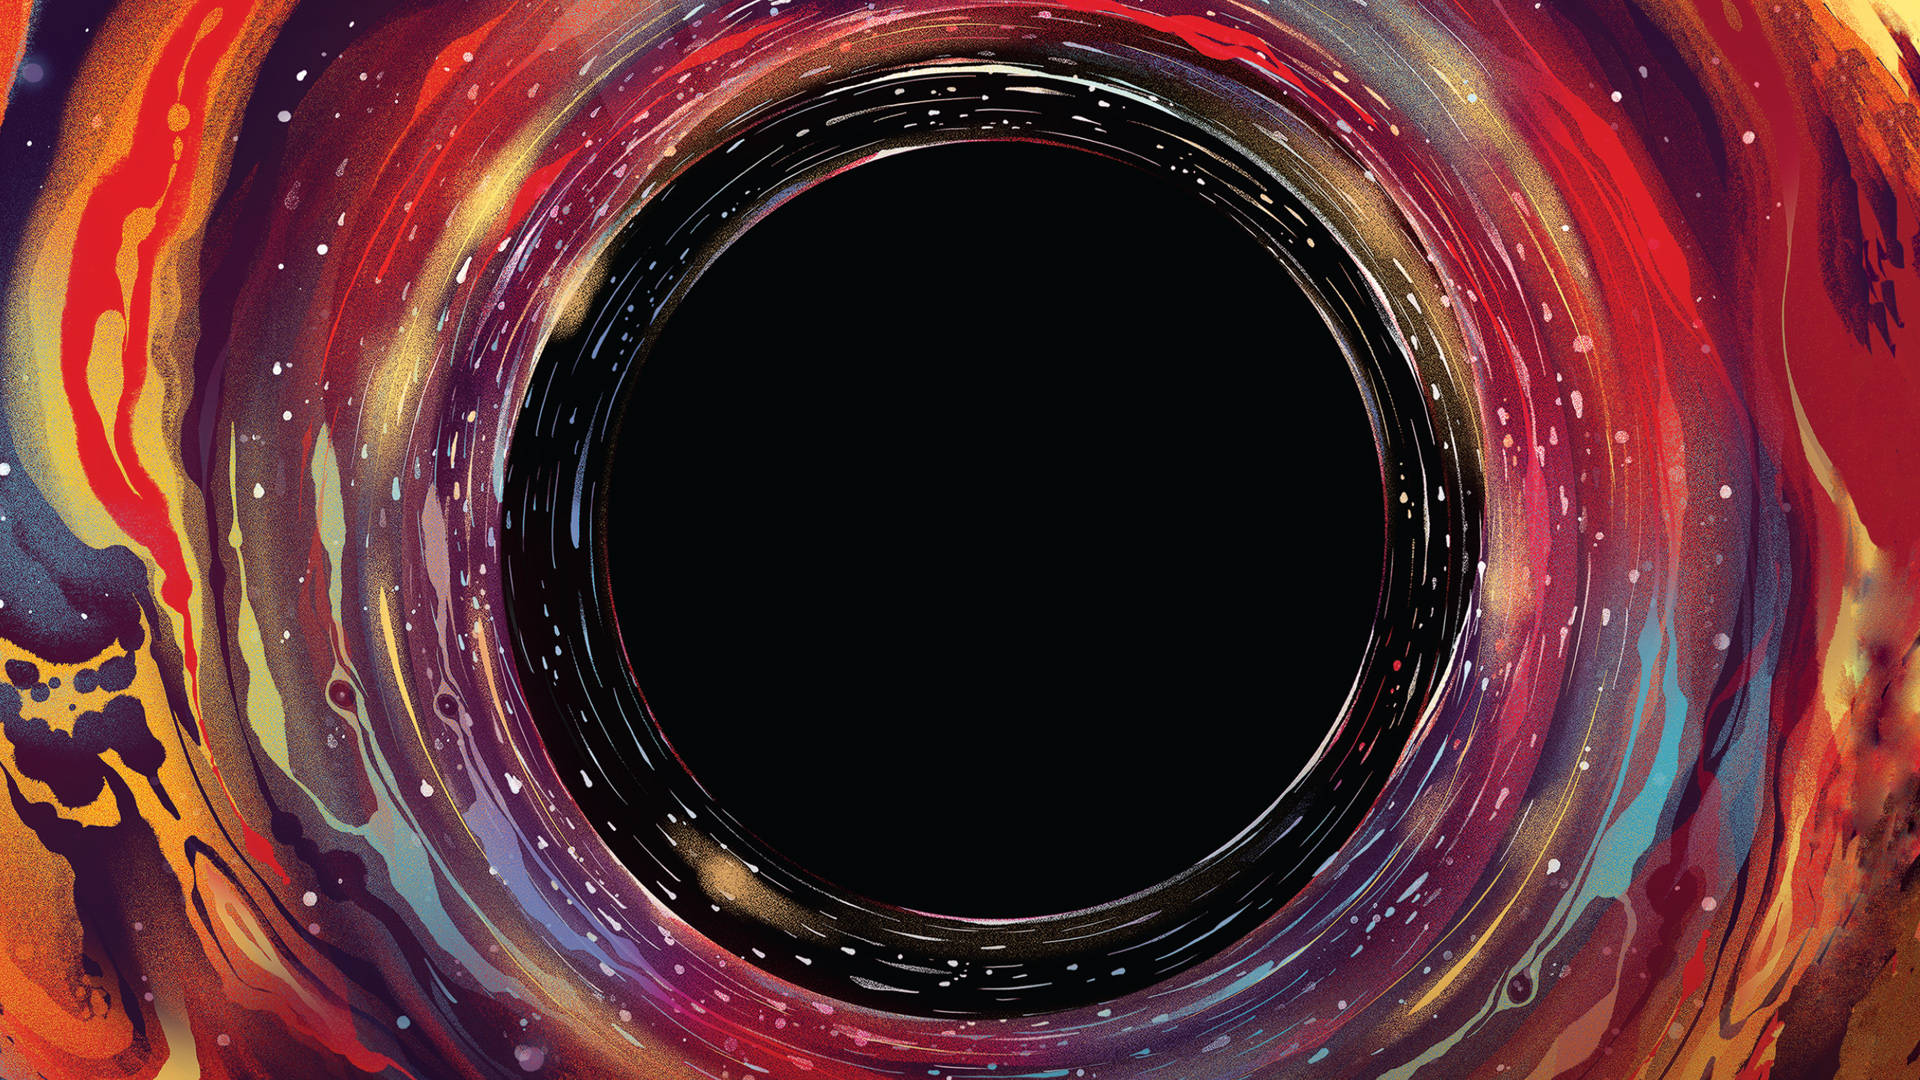 A Black Hole With Colorful Swirls And Swirls Background